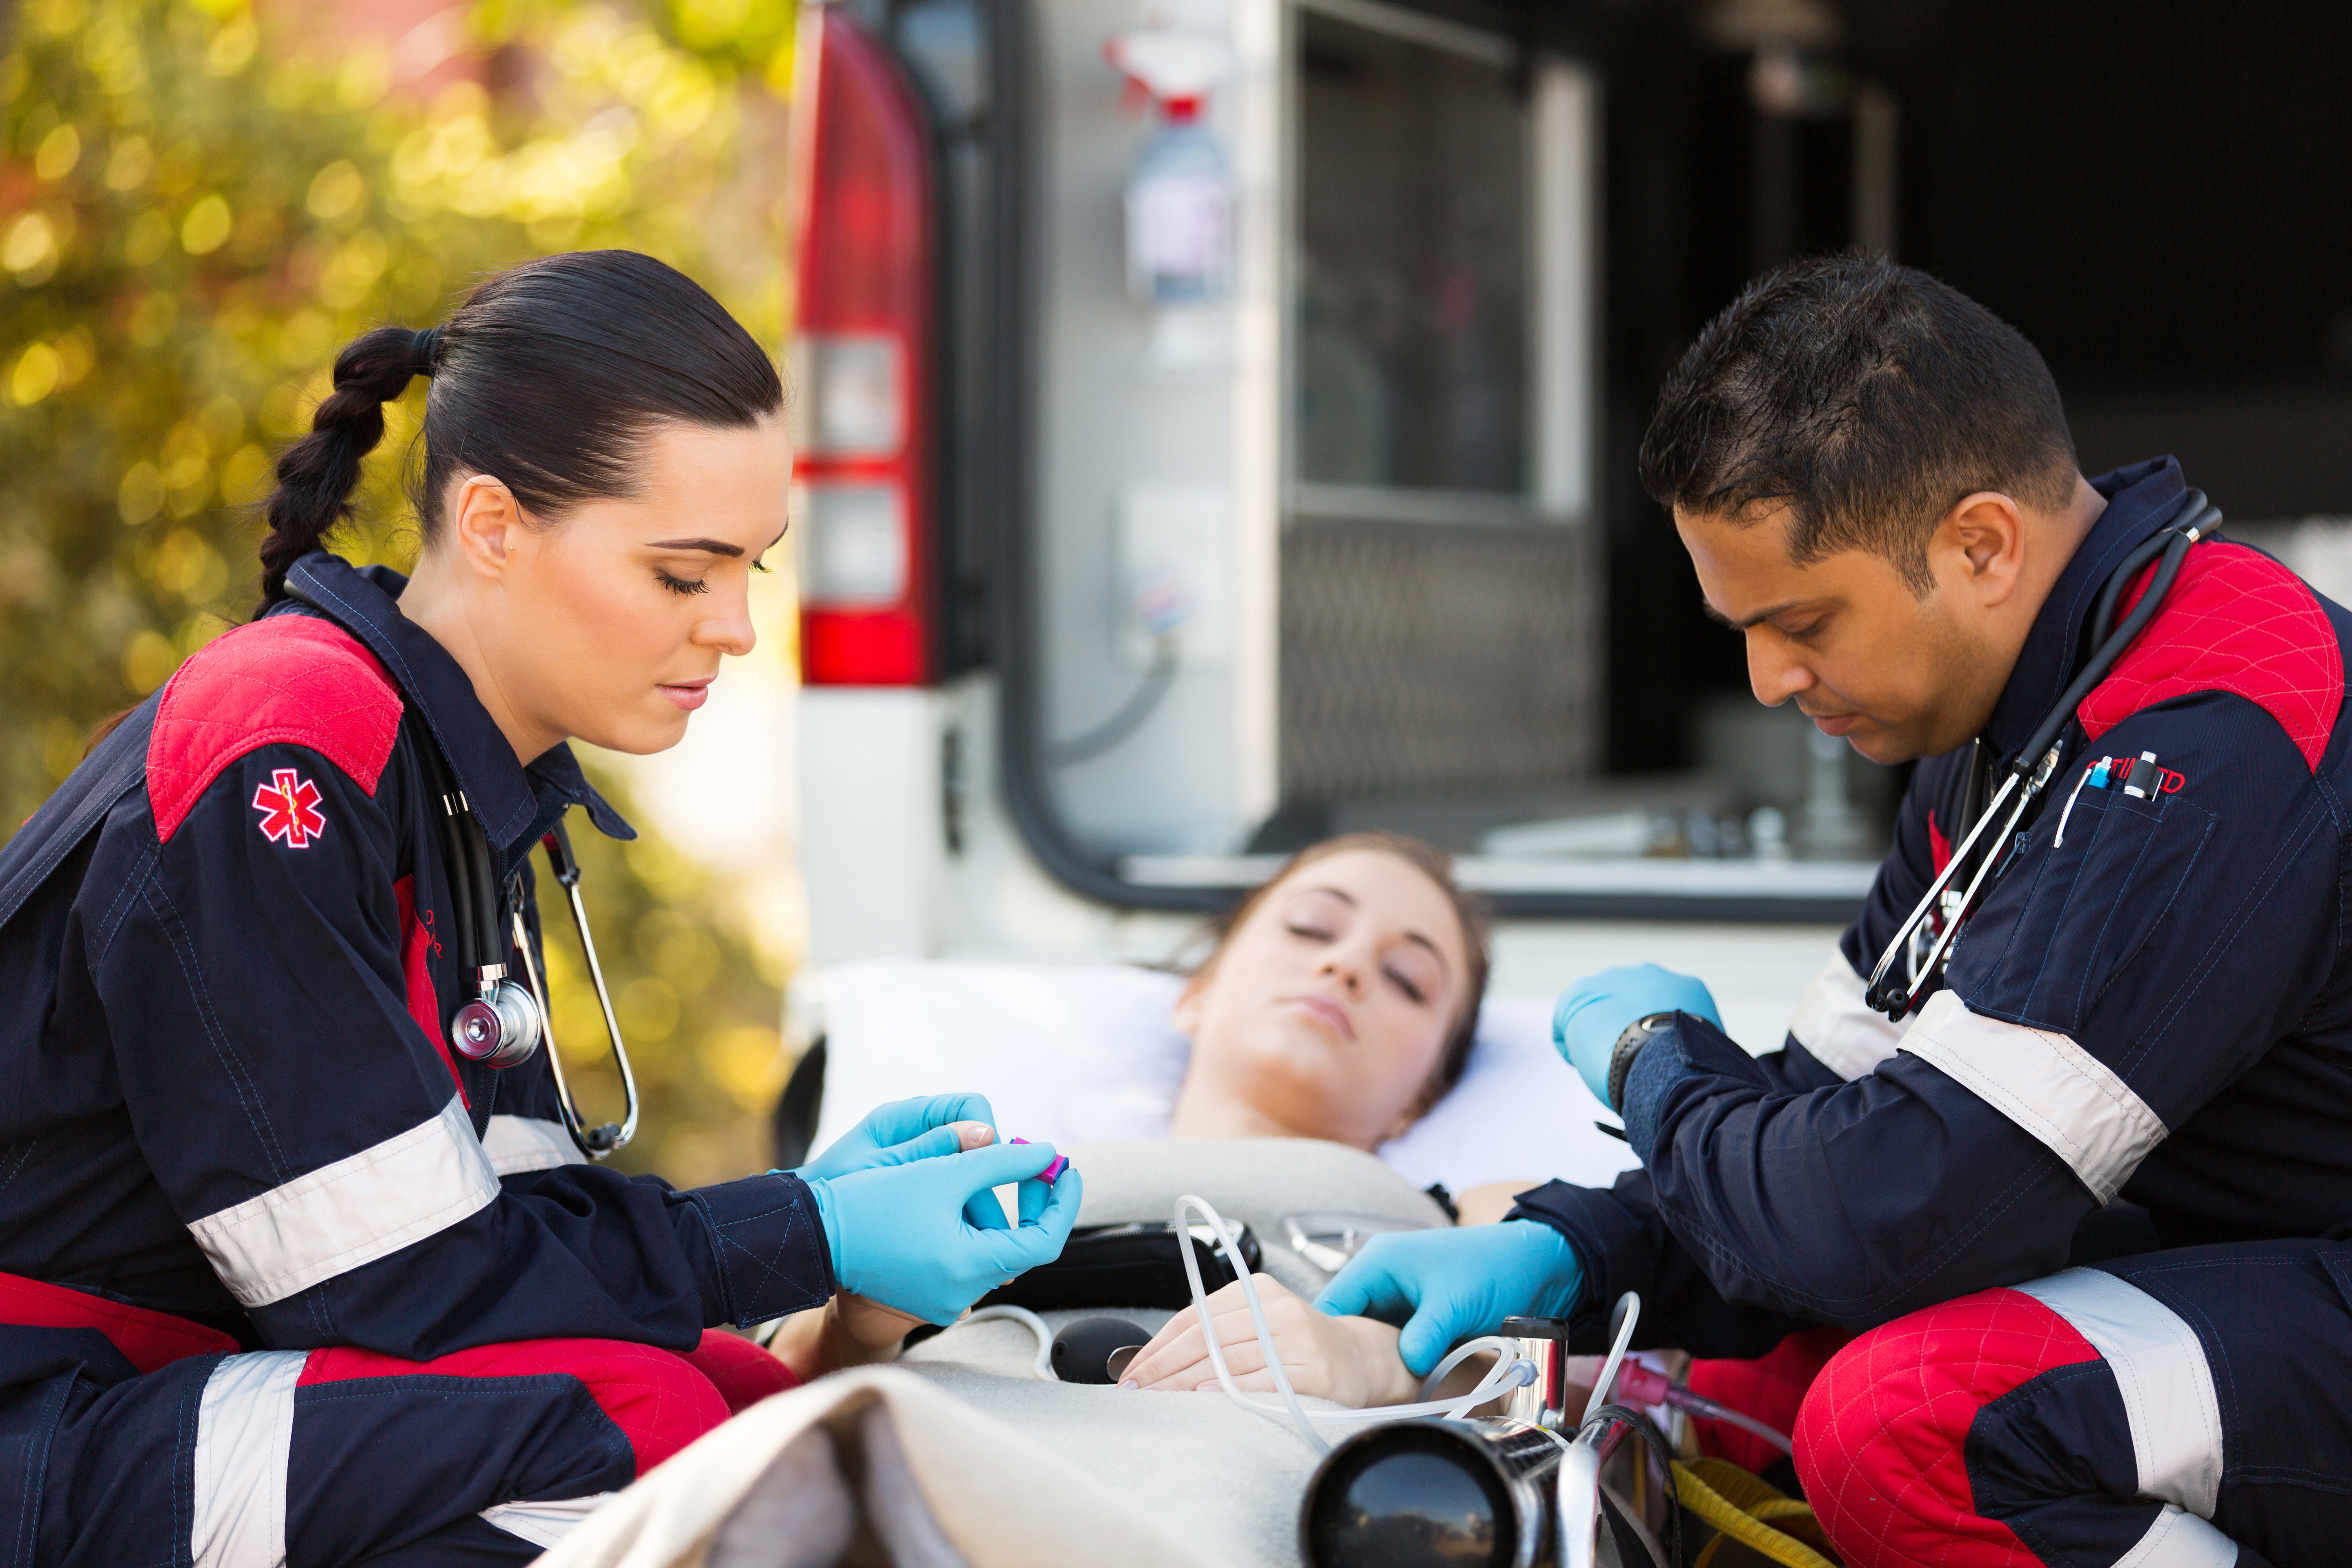 Paramedics giving first aid to a woman | Source: Shutterstock